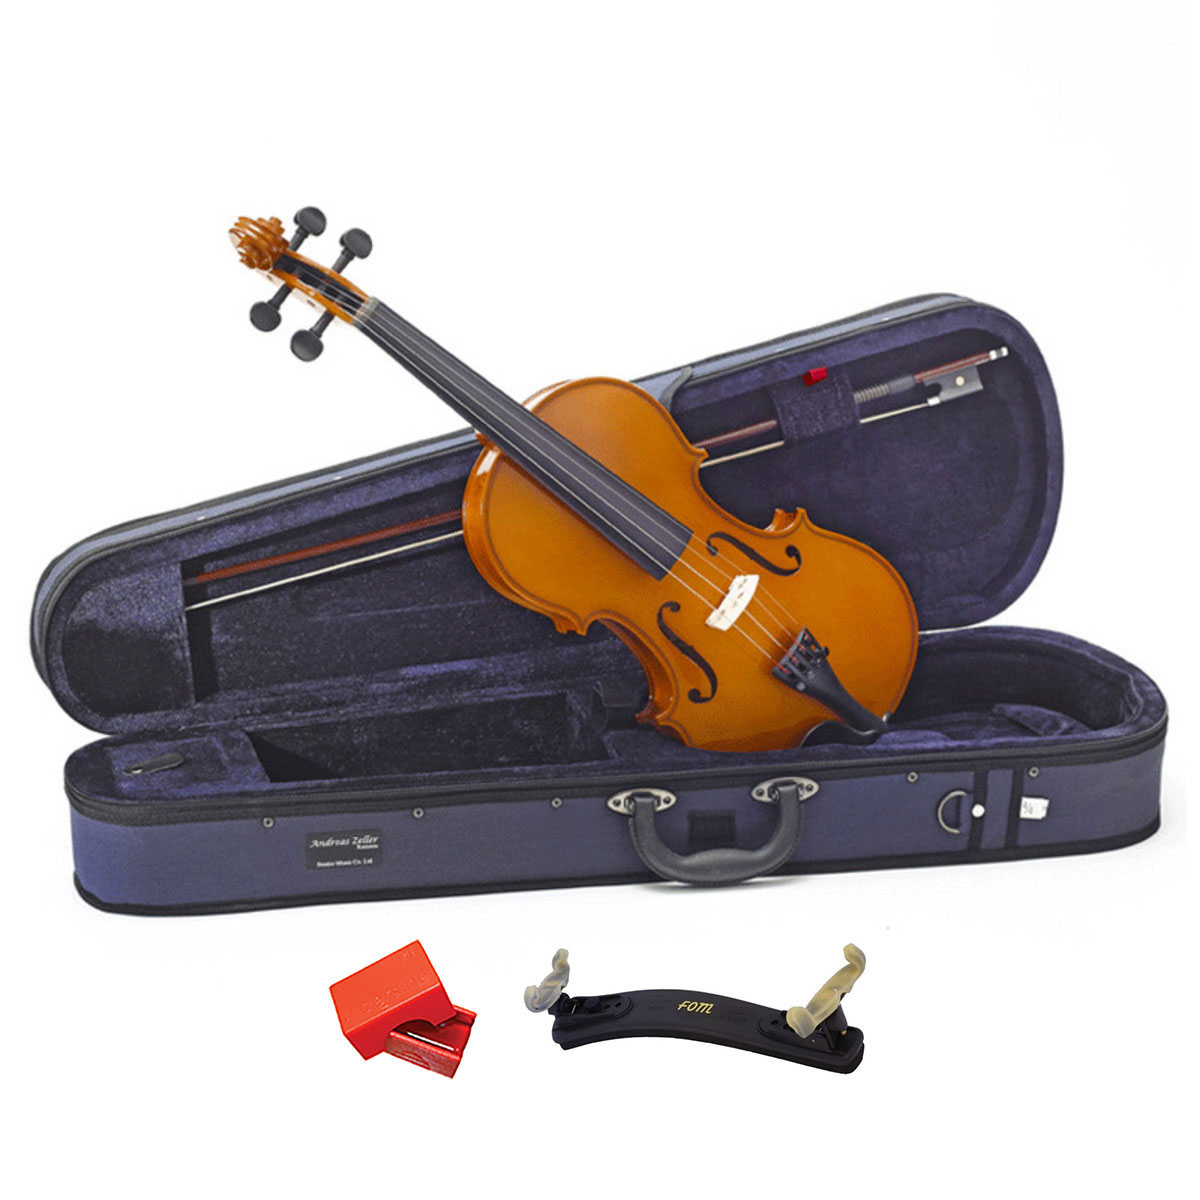 Co　Violin　Musical　1/2　Outfit　Hire　Hire　Size　Instrument